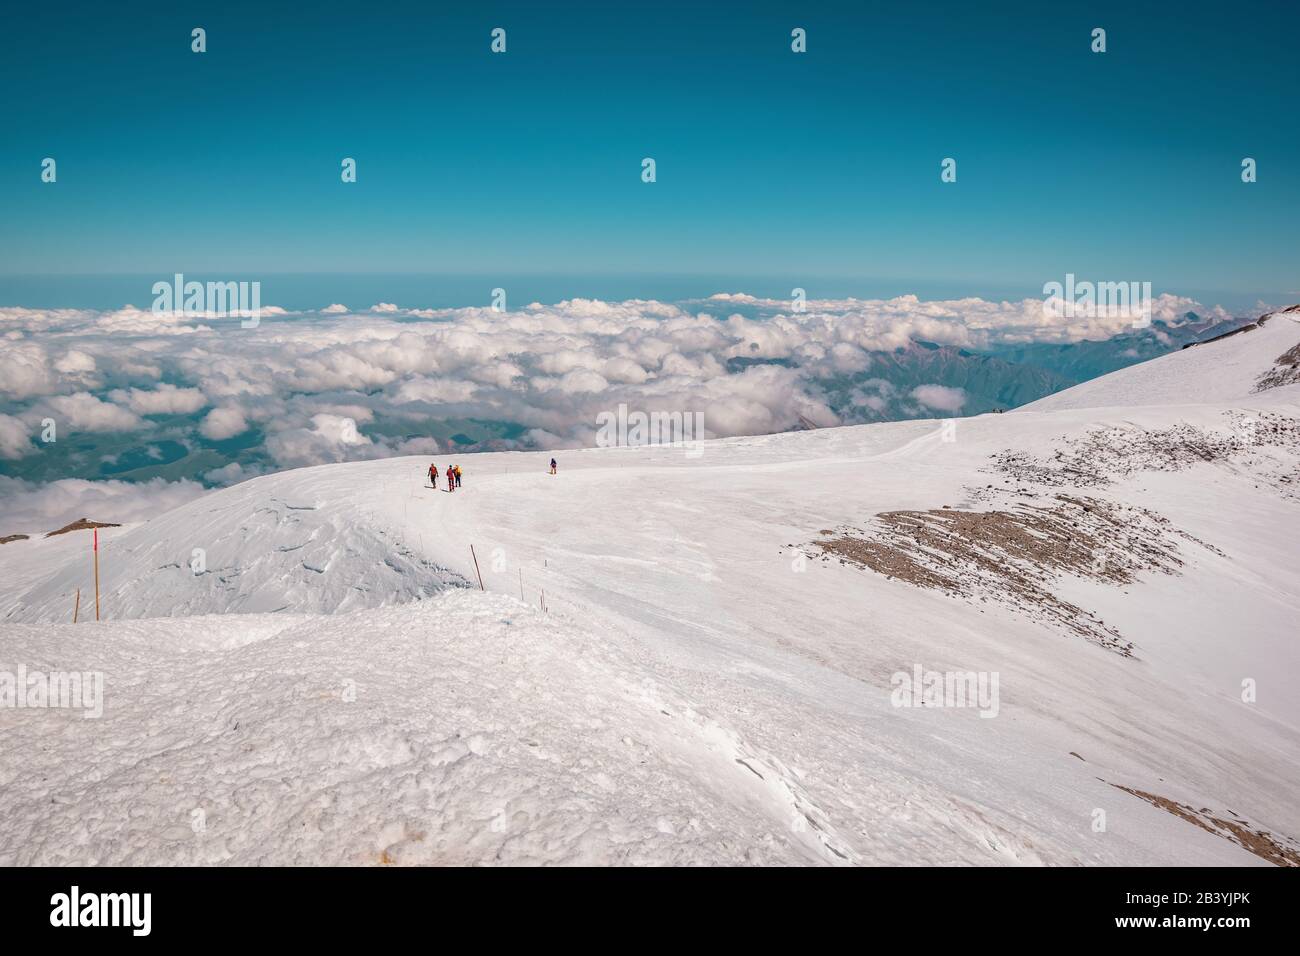 Landscape view of snow-capped hillside Mount Elbrus, Caucasus, Russia. A path leading down from the top. Group of alpinists descending from the top. Stock Photo